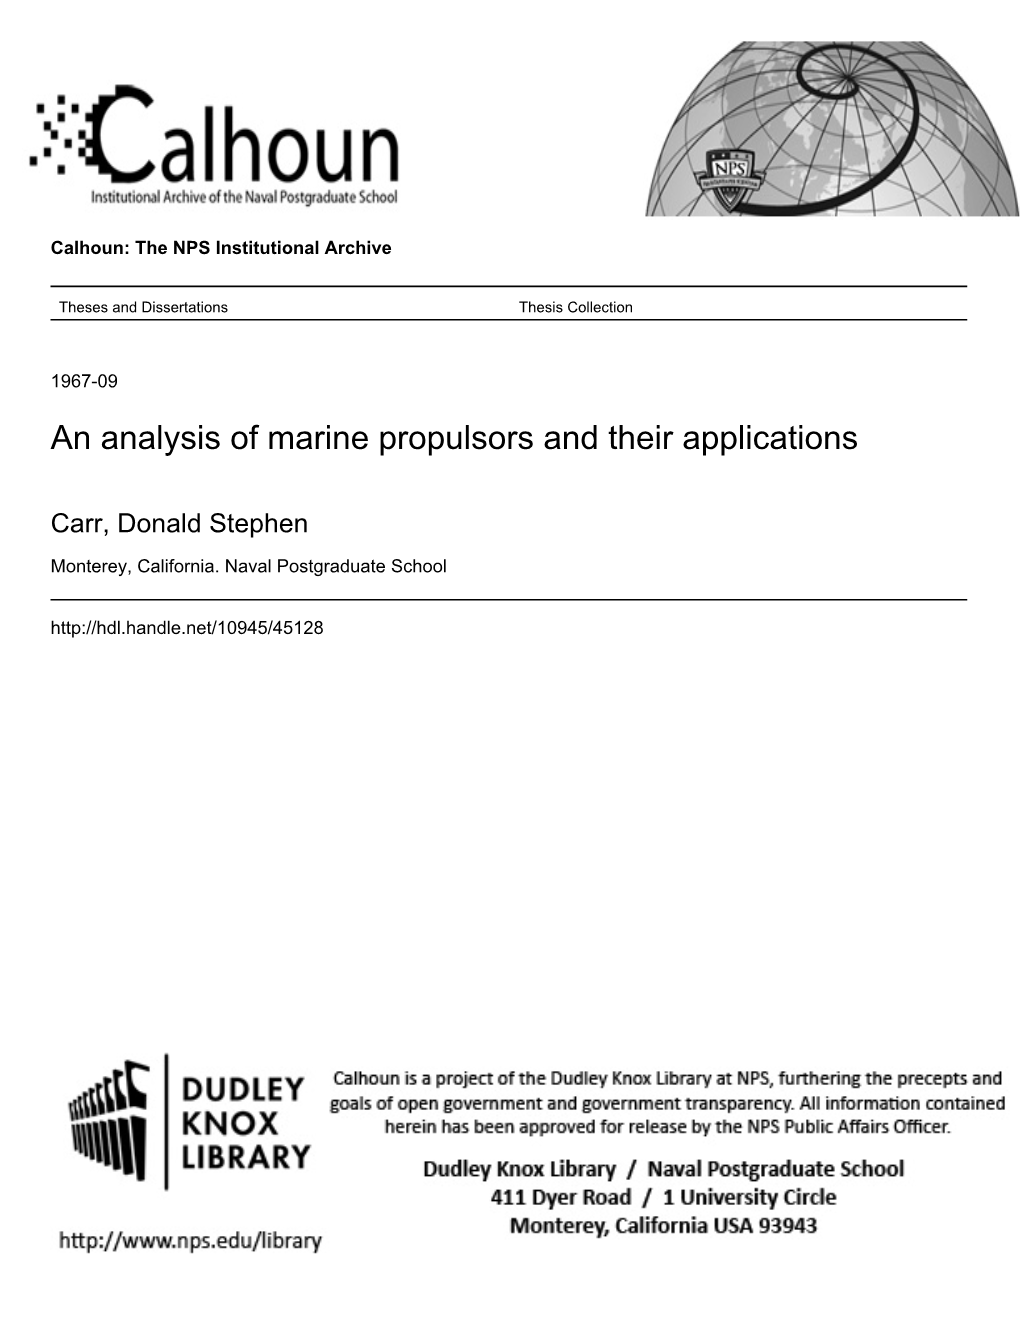 An Analysis of Marine Propulsors and Their Applications